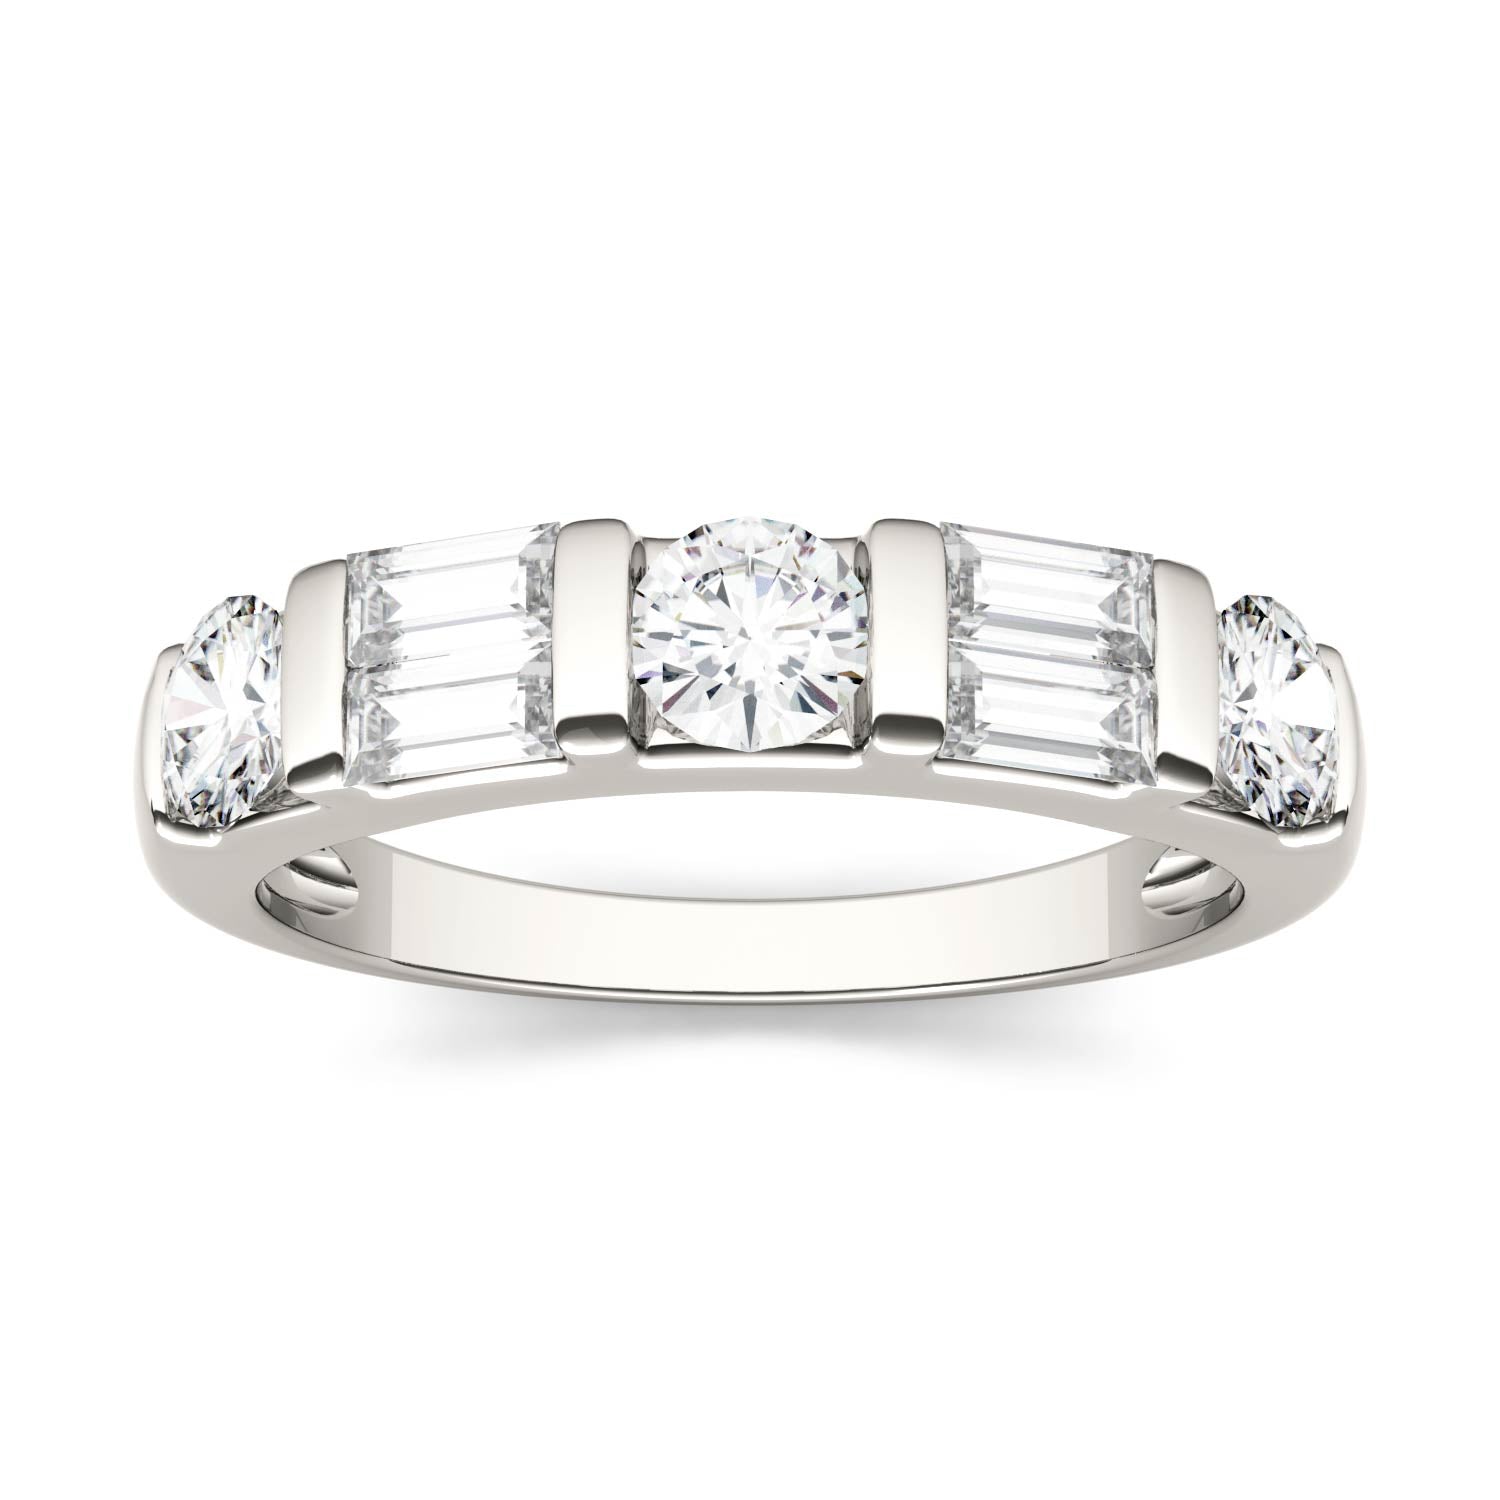 1.15 CTW DEW Straight Baguette Moissanite Stackable Ring in 14K White Gold